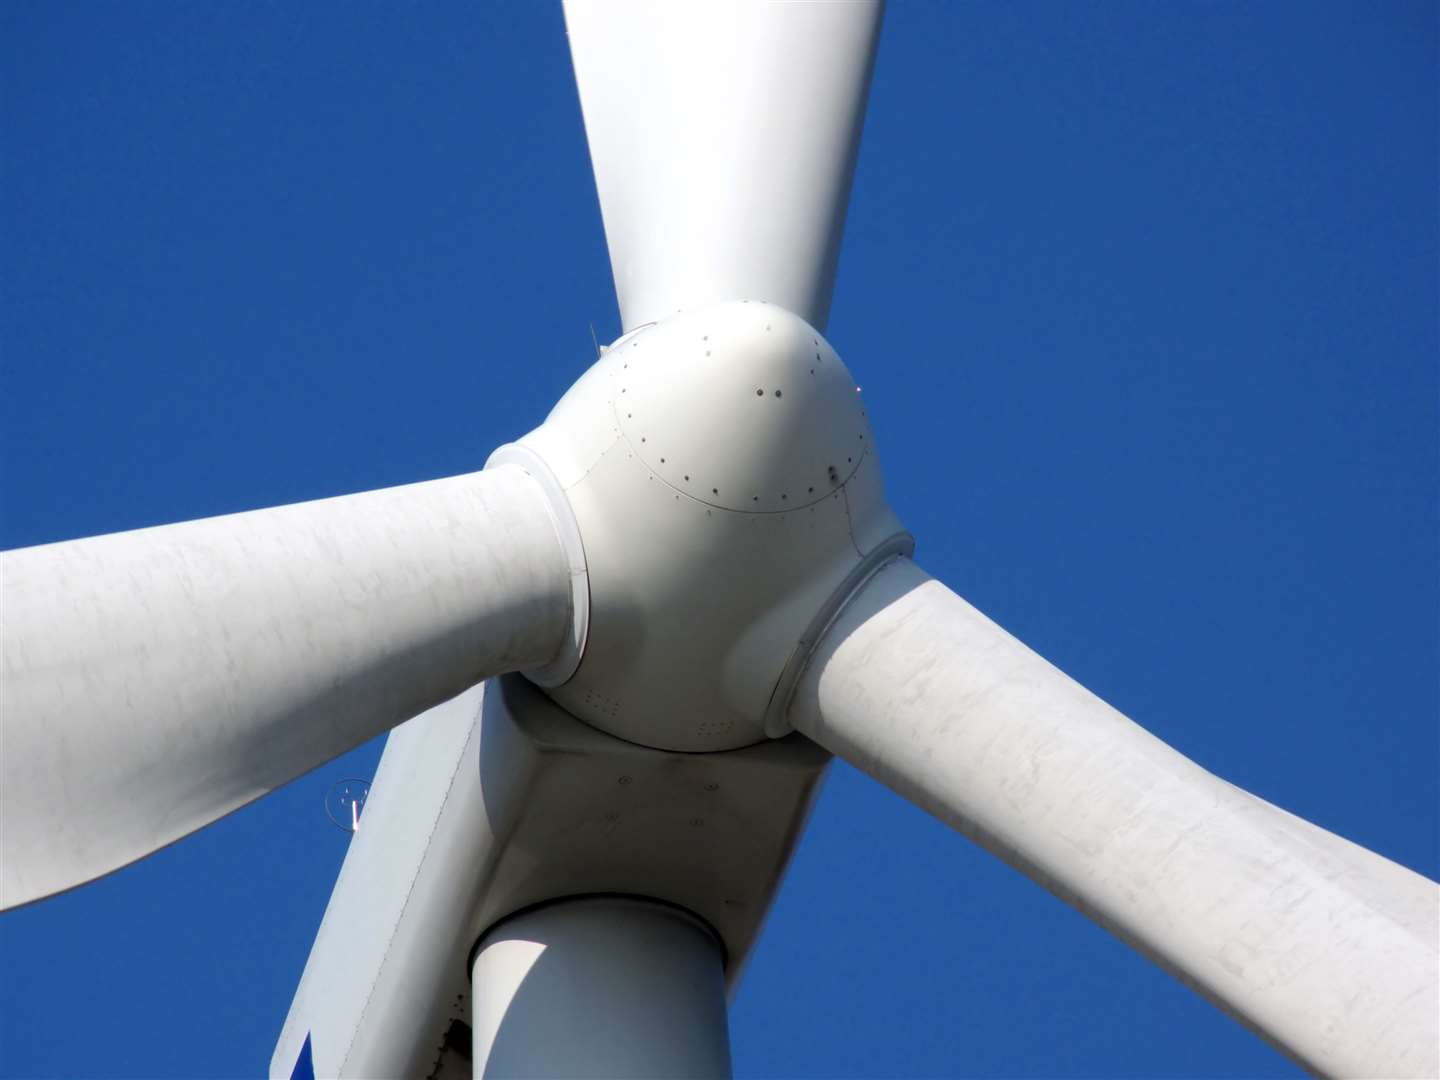 Thirty-seven turbines measuring 180m to tip height are proposed at Garvary.